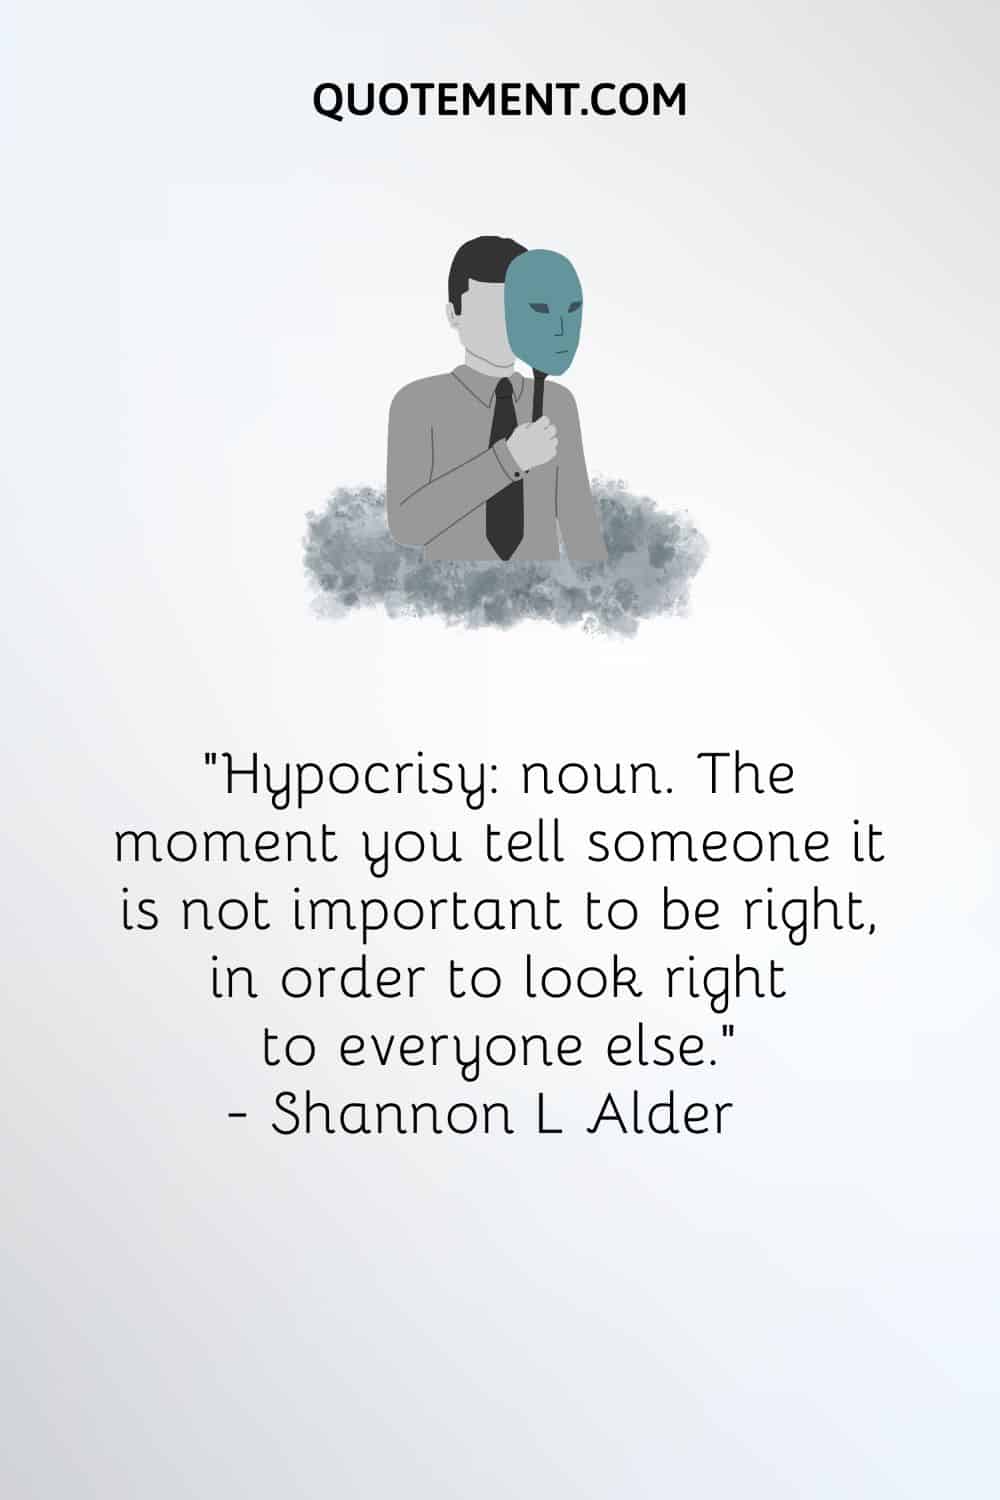 “Hypocrisy noun. The moment you tell someone it is not important to be right, in order to look right to everyone else.” — Shannon L Alder